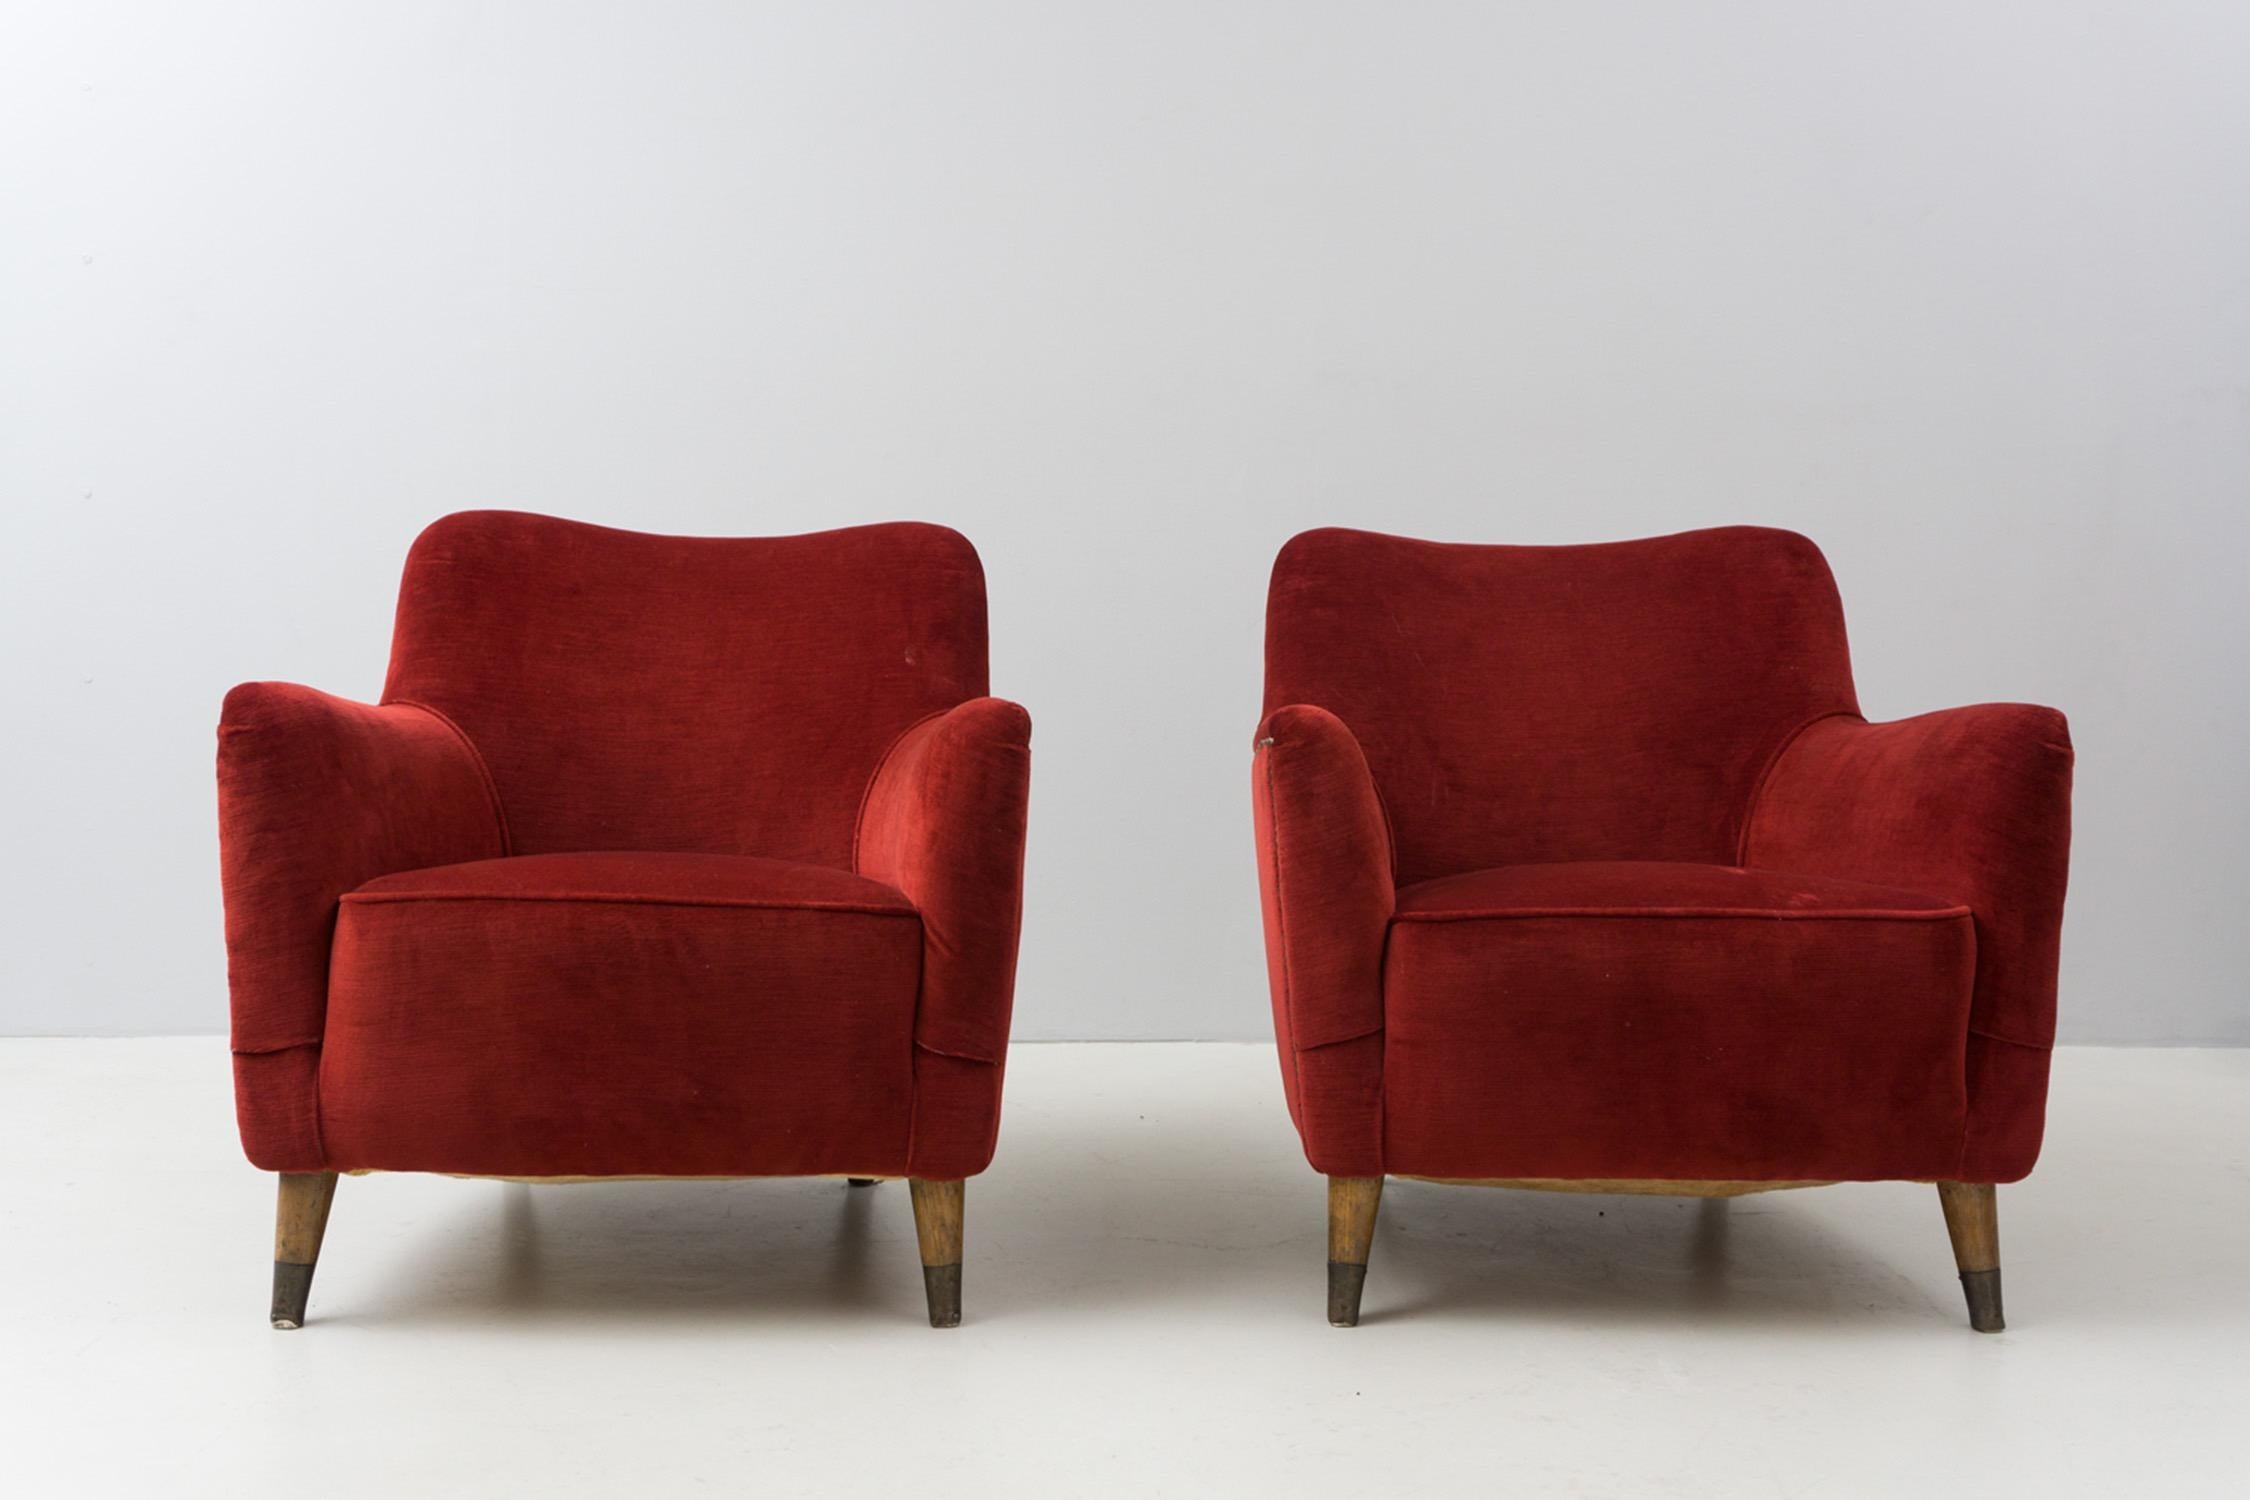 These beautiful and sophisticated armchairs were originally designed for the interior design for the luxurious first class sections of cruise liner 'Giulio Cesare' and 'Conte Grande' in 1948. Made of beech wood with brass shoes. Reupholstered with a